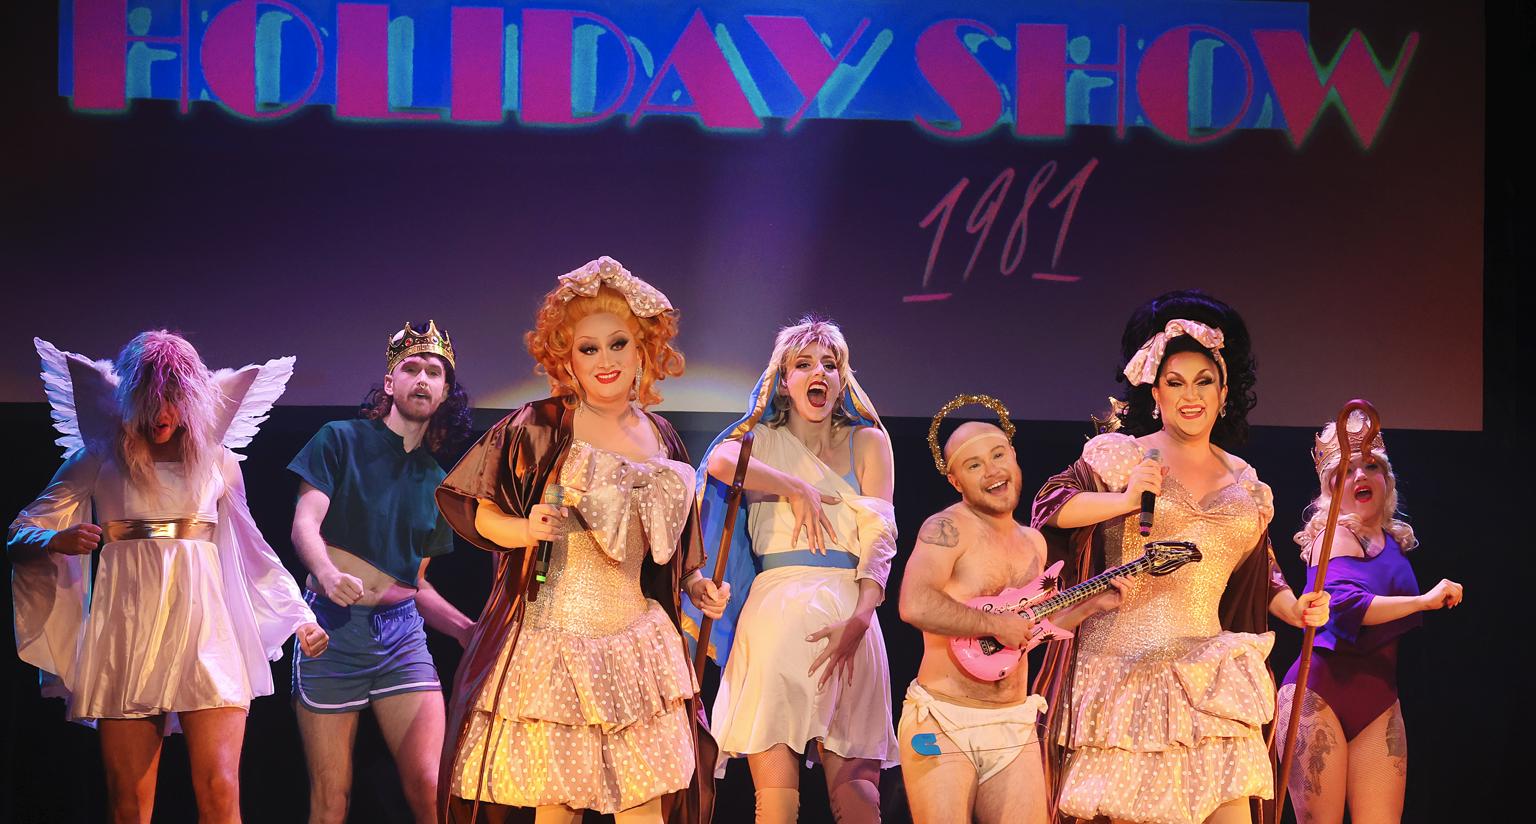 Jinkx & DeLa's latest holiday show has laughs, heart, & guts